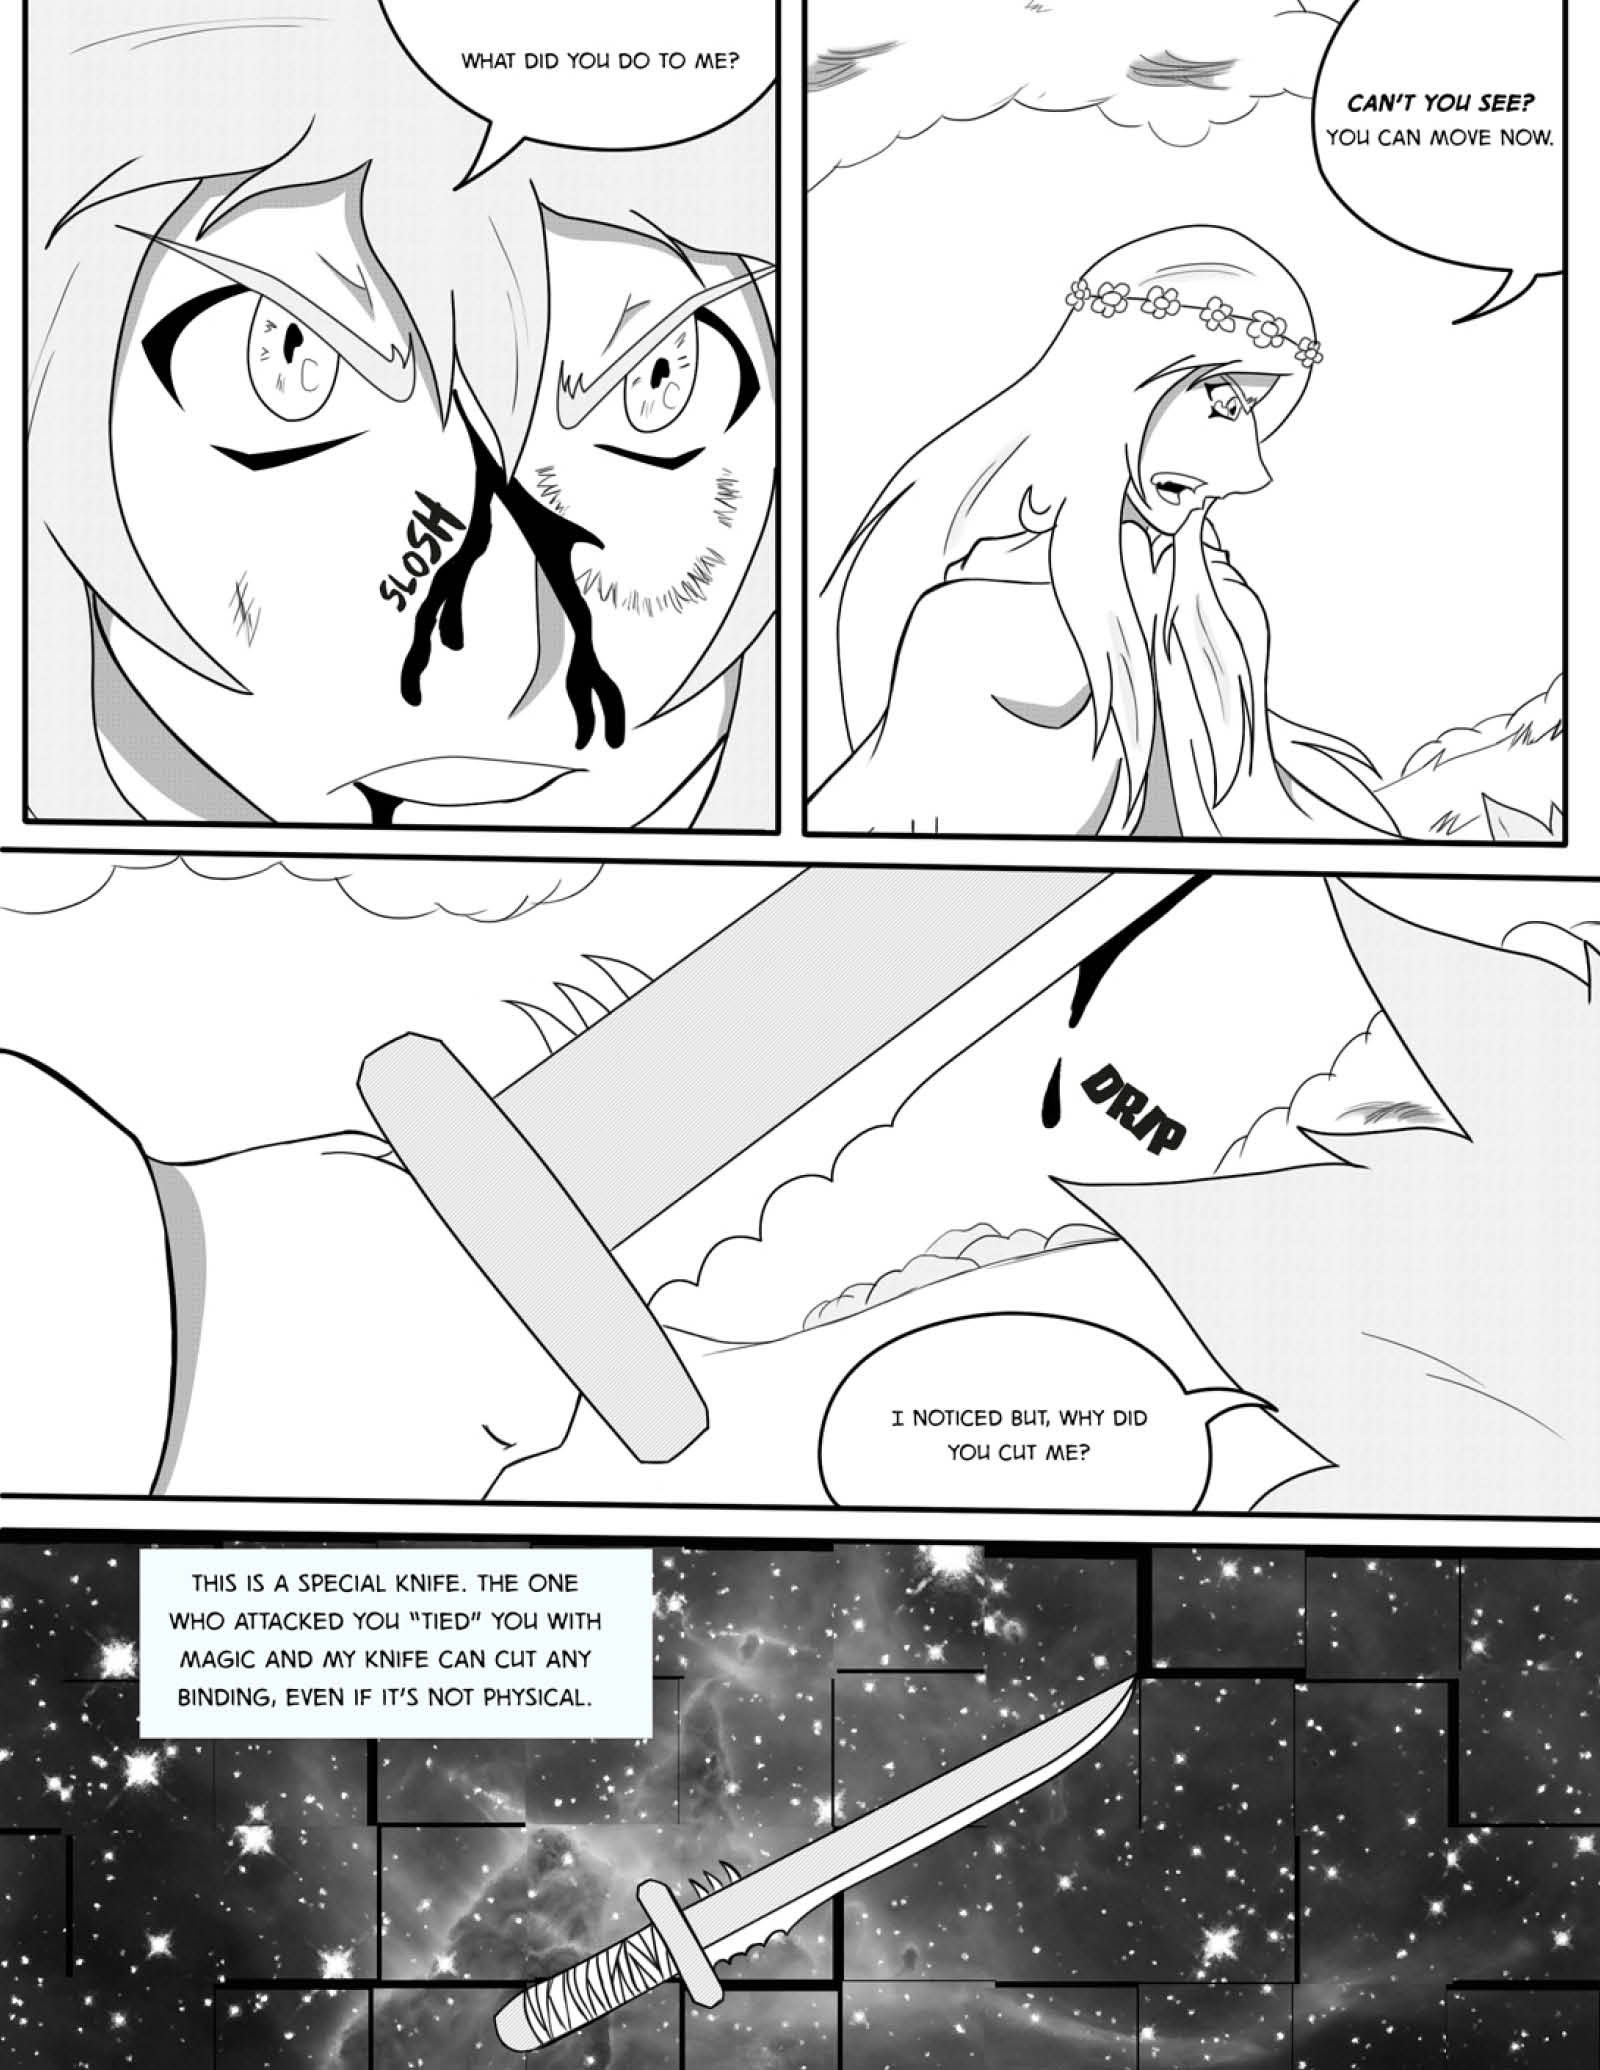 Series Dilan: the Chronicles of Covak - Chapter 7 - Page 13 - Language ENG